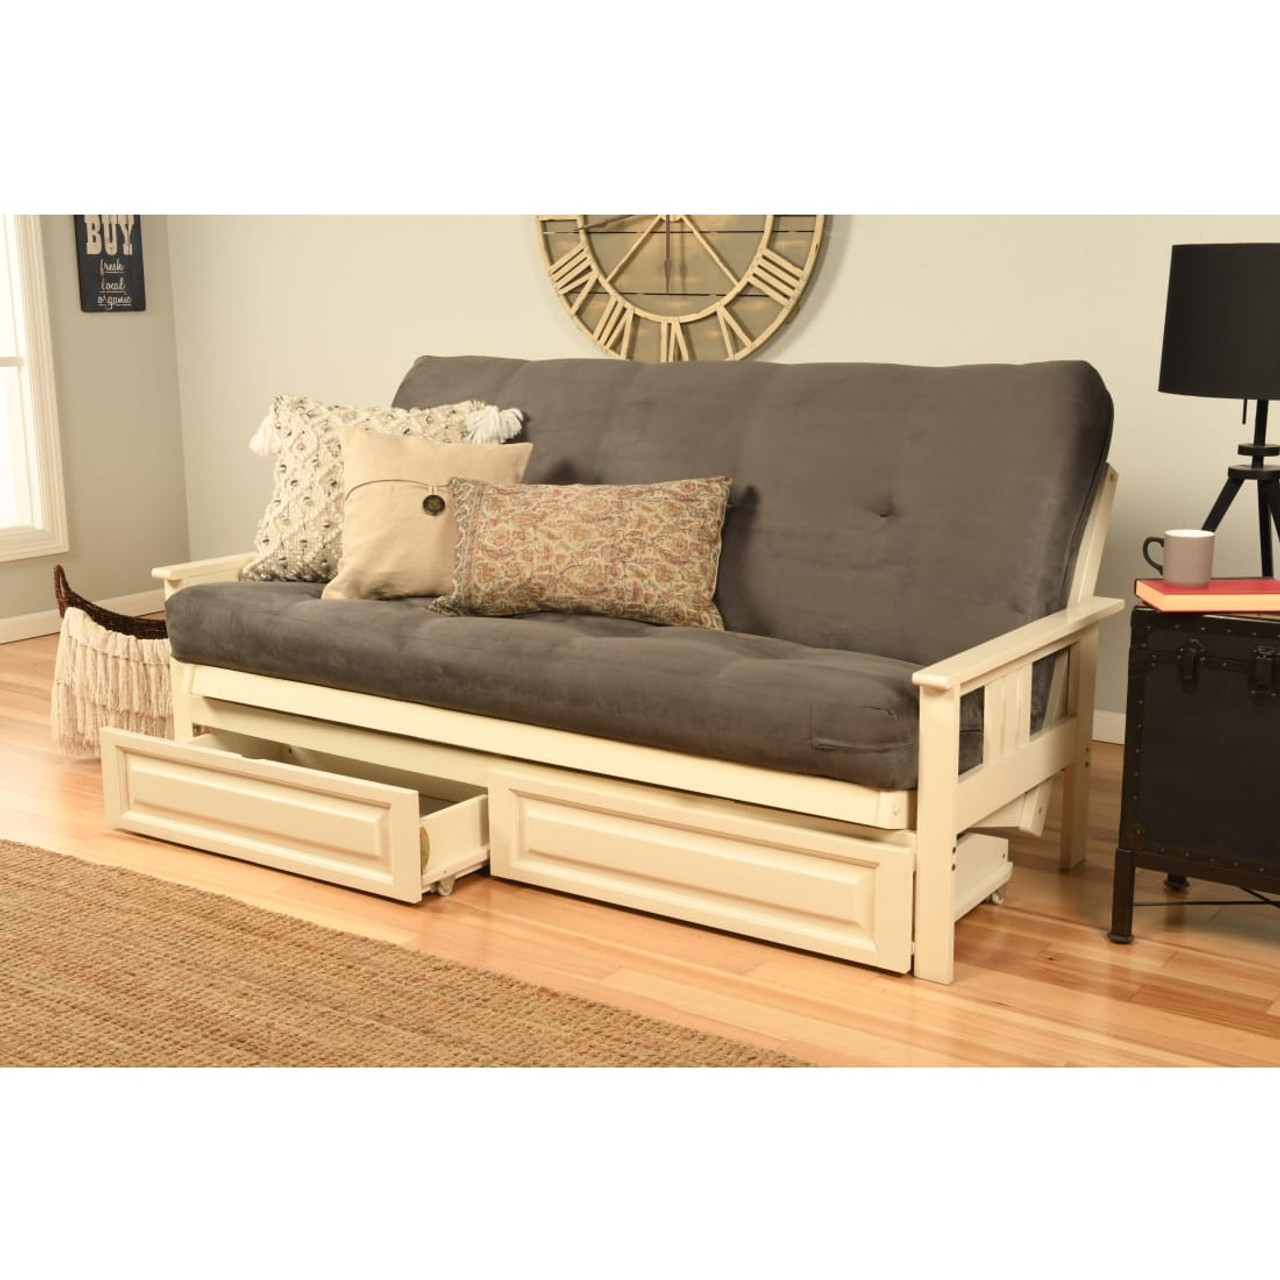 Monterey Futon Frame and Storage Drawers in Antique White Finish with Suede Gray Mattress